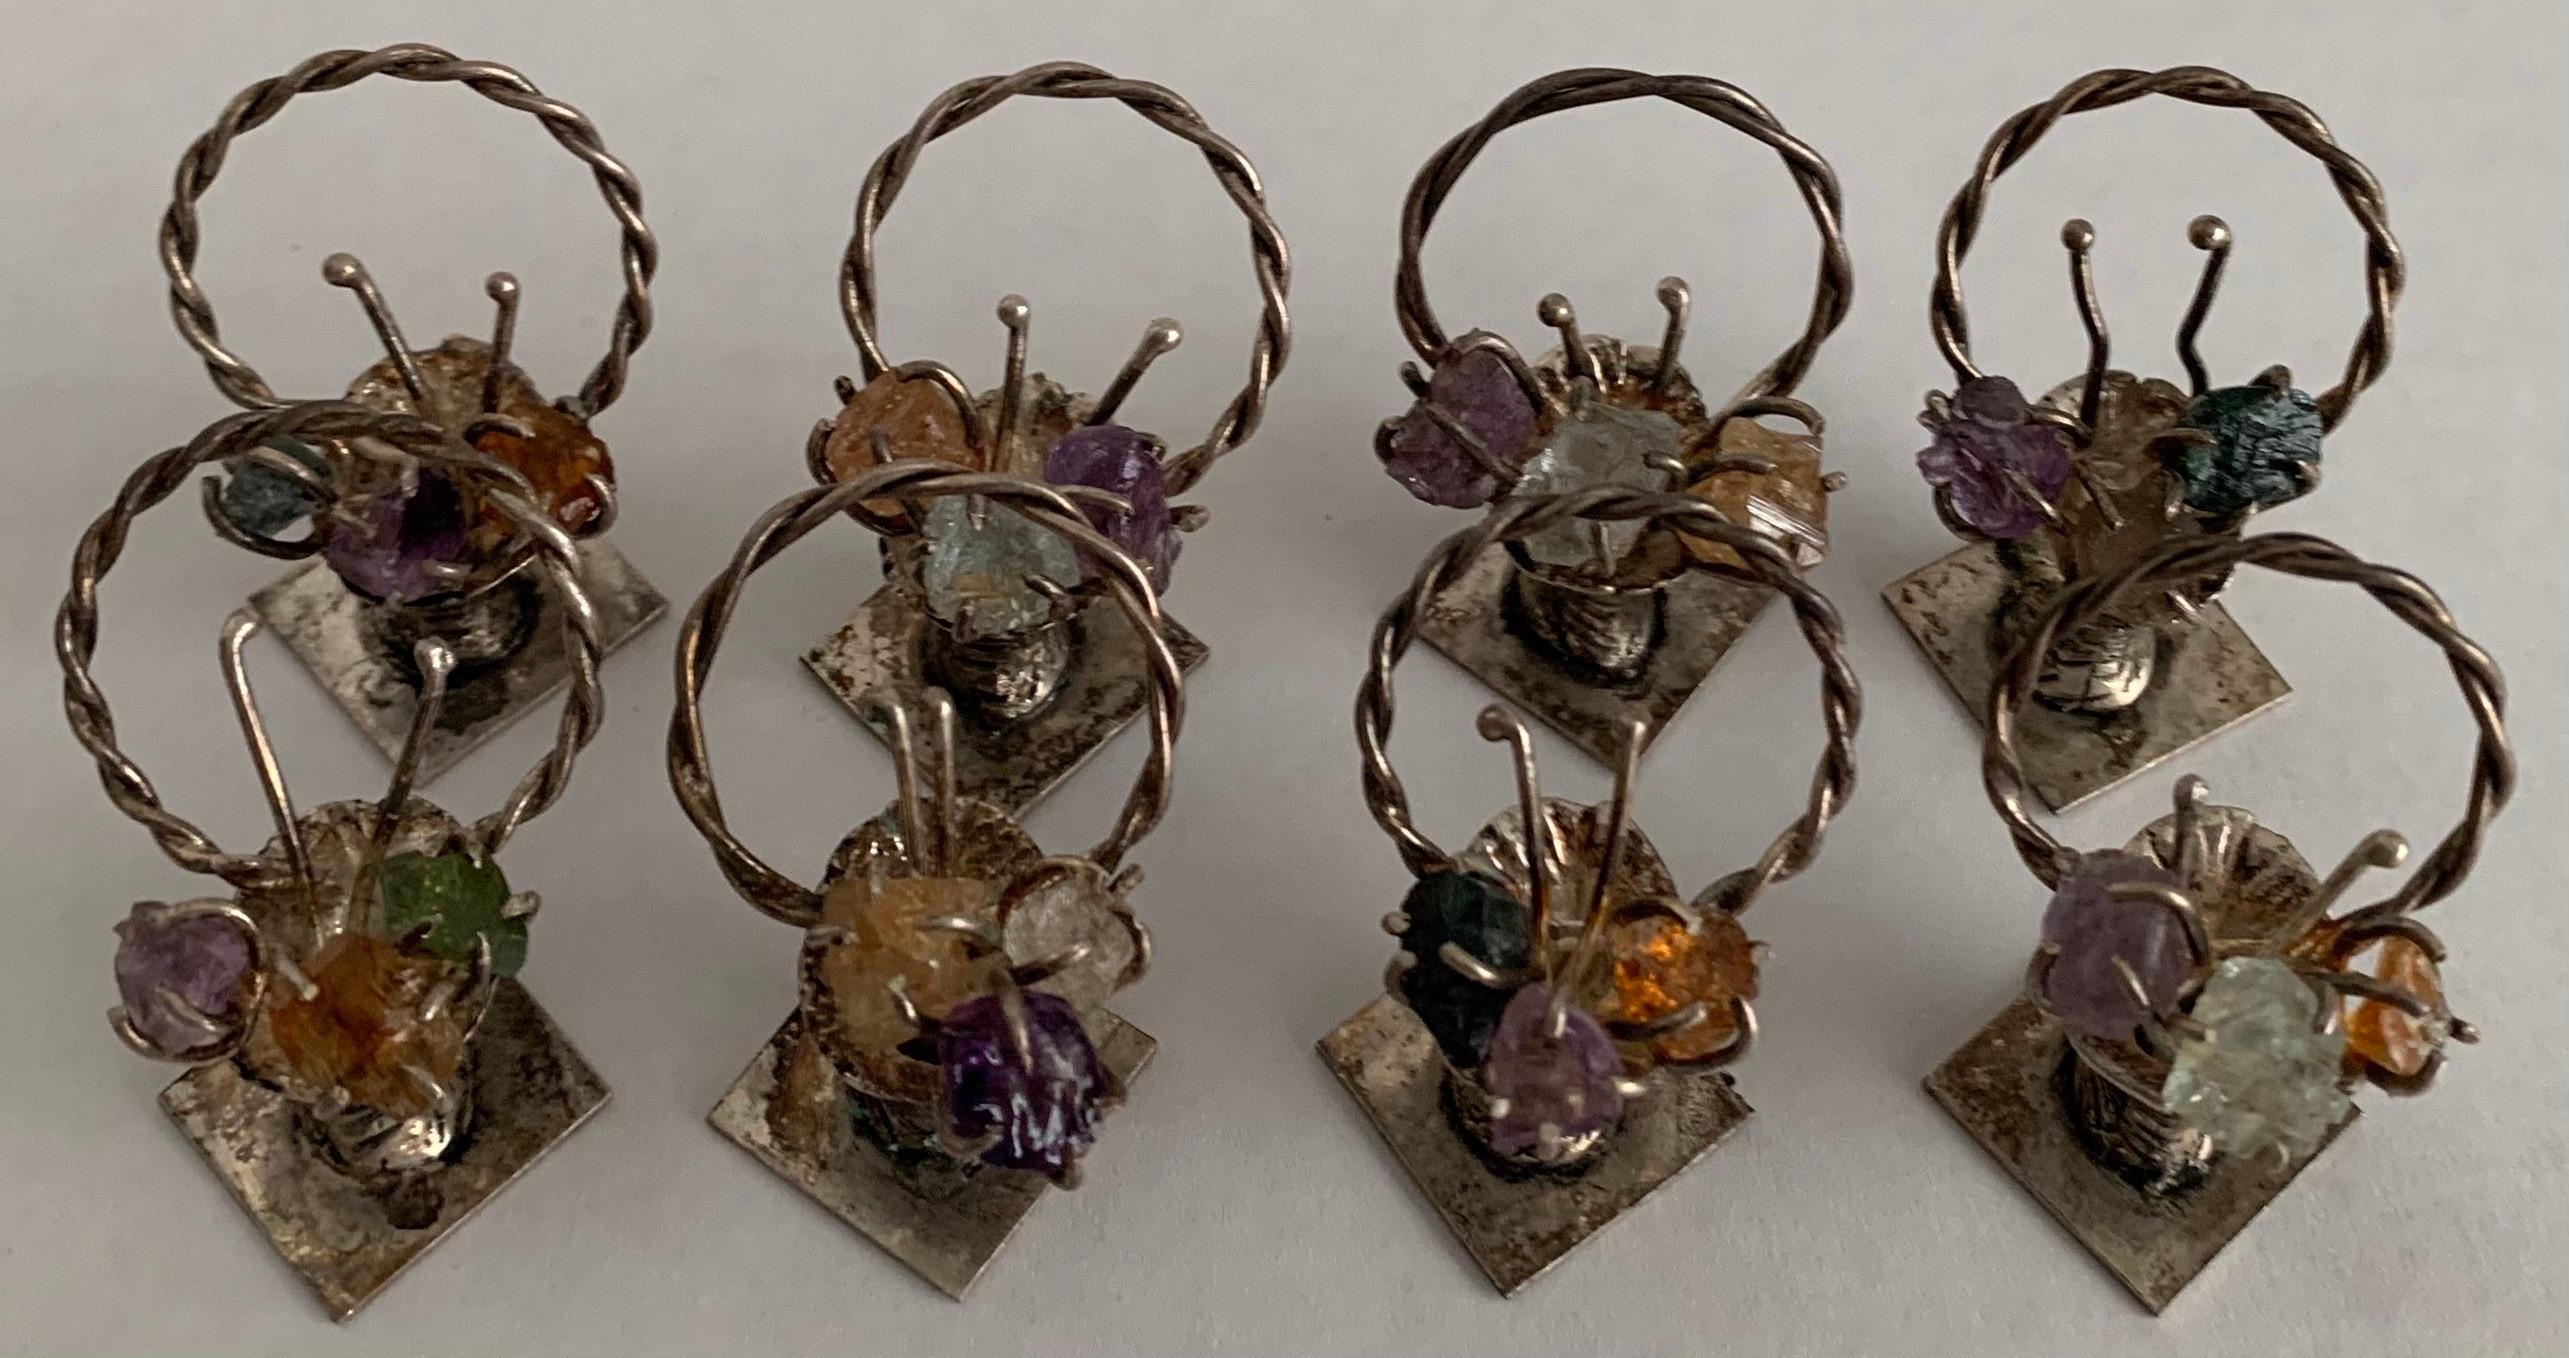 1950s Brazilian 900 silver basket place card holders. Each holder features a “bouquet” of semi precious stones. Twisted round silver holder. Each holder is stamped 900 on the underside. Overall unpolished patina.